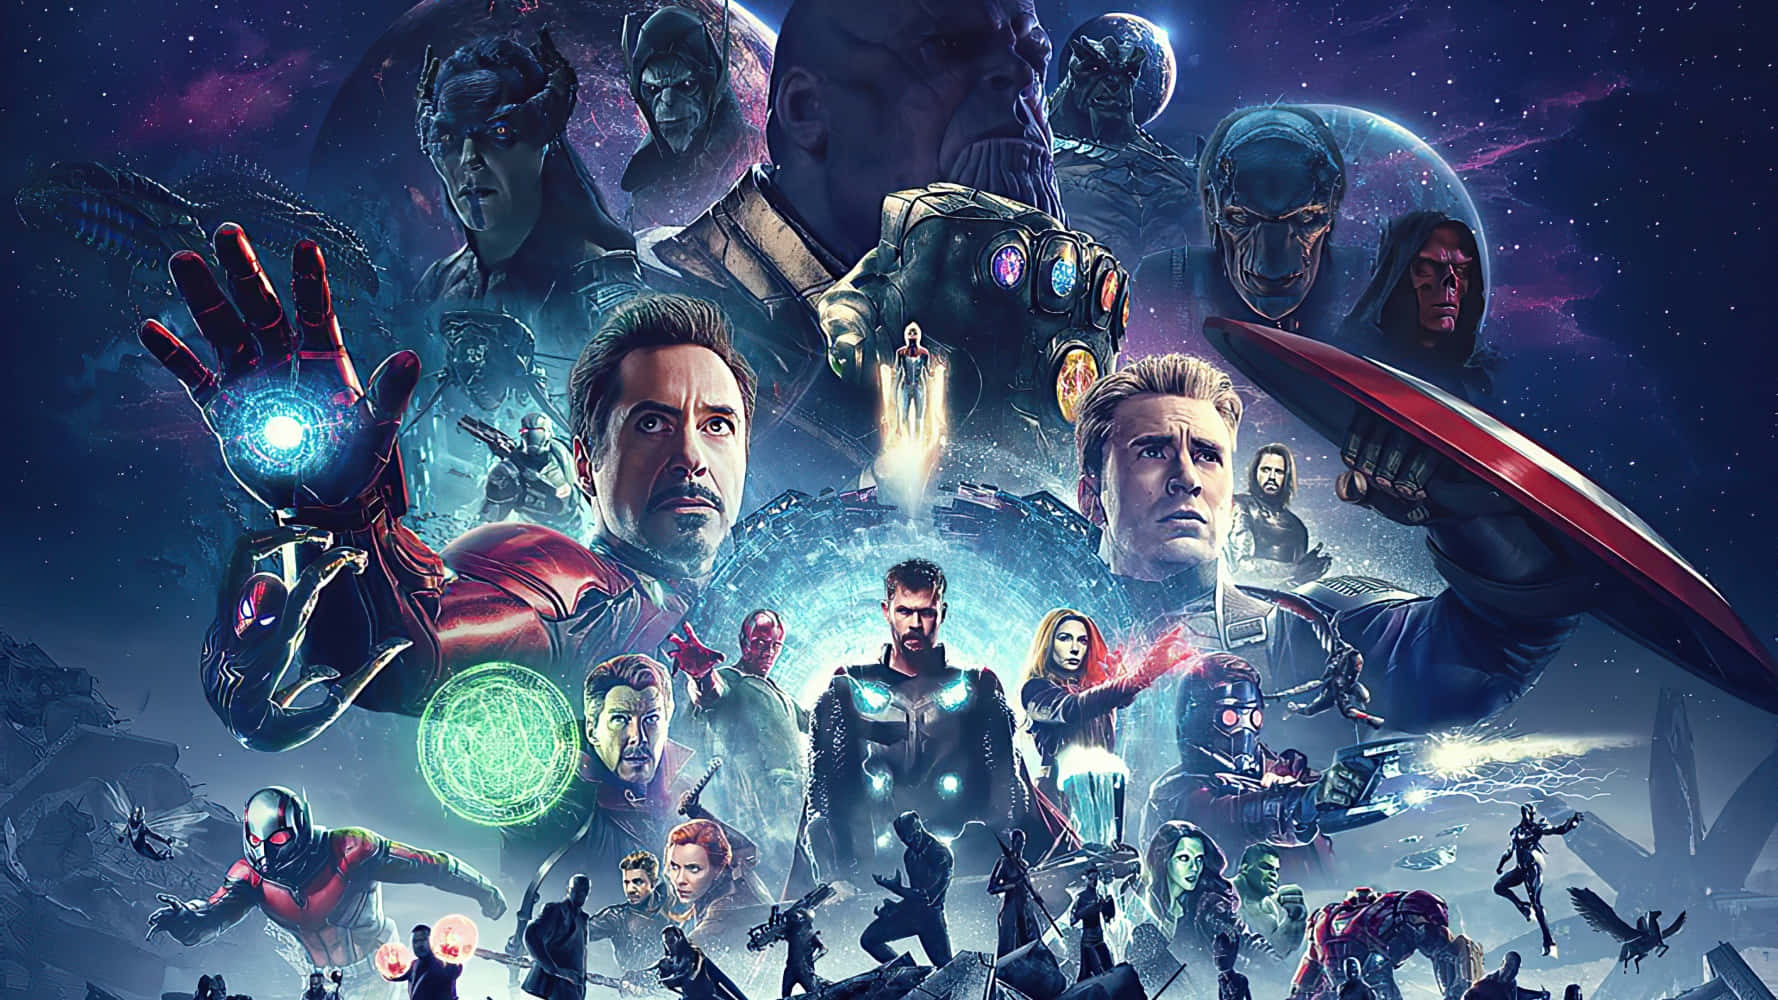 The Avengers Unite For An Epic Stand Against Thanos in "Avengers Endgame"